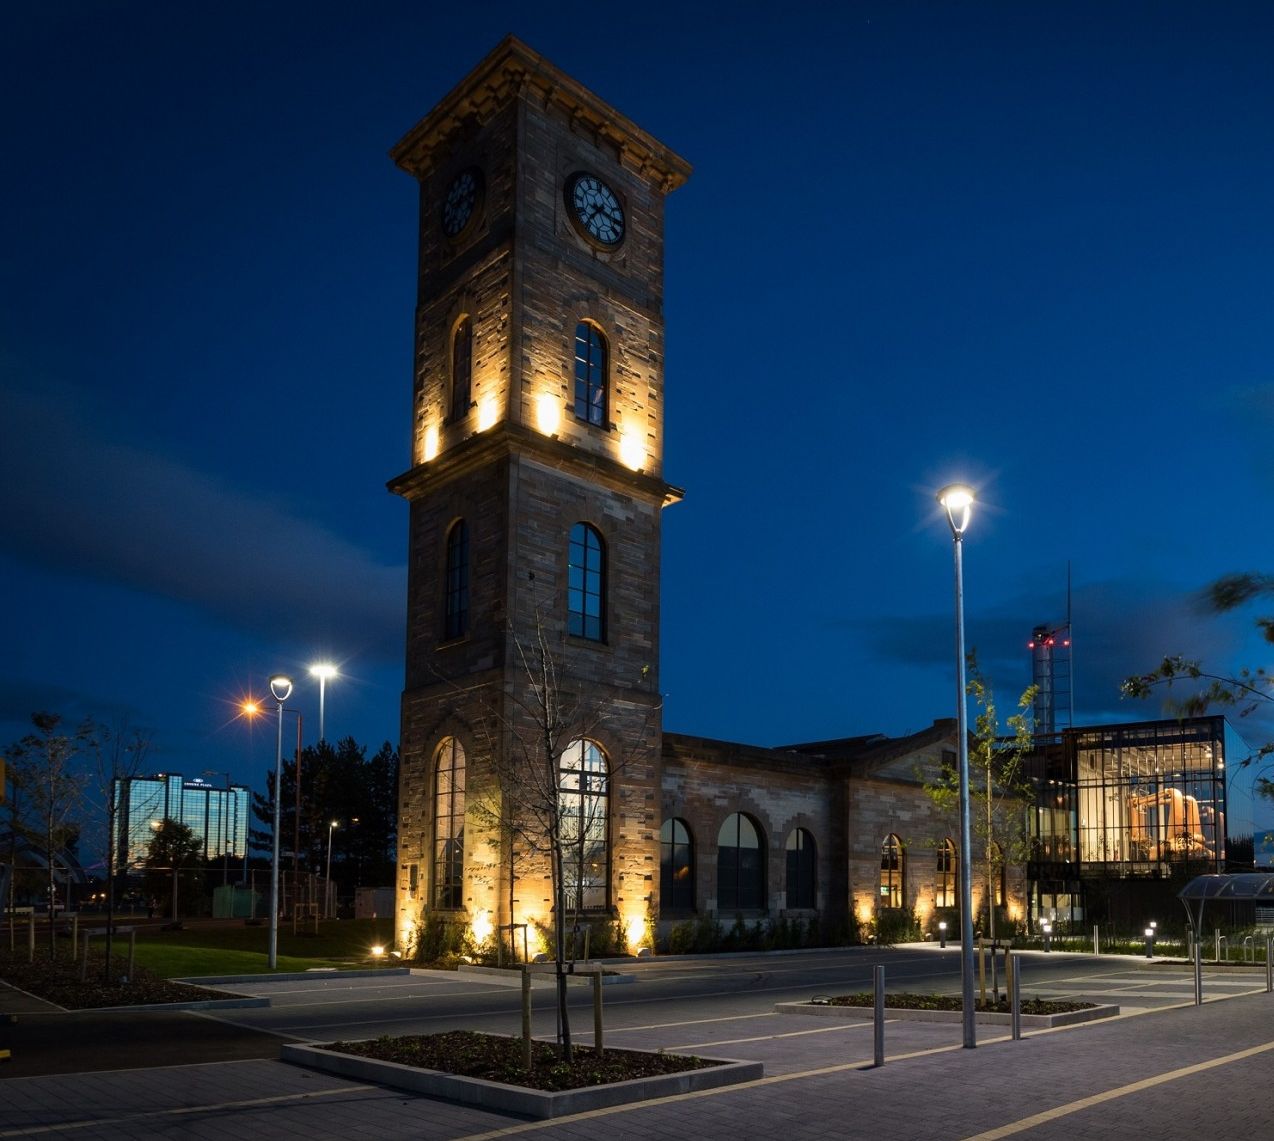 Clock tower at Clydeside Distillery